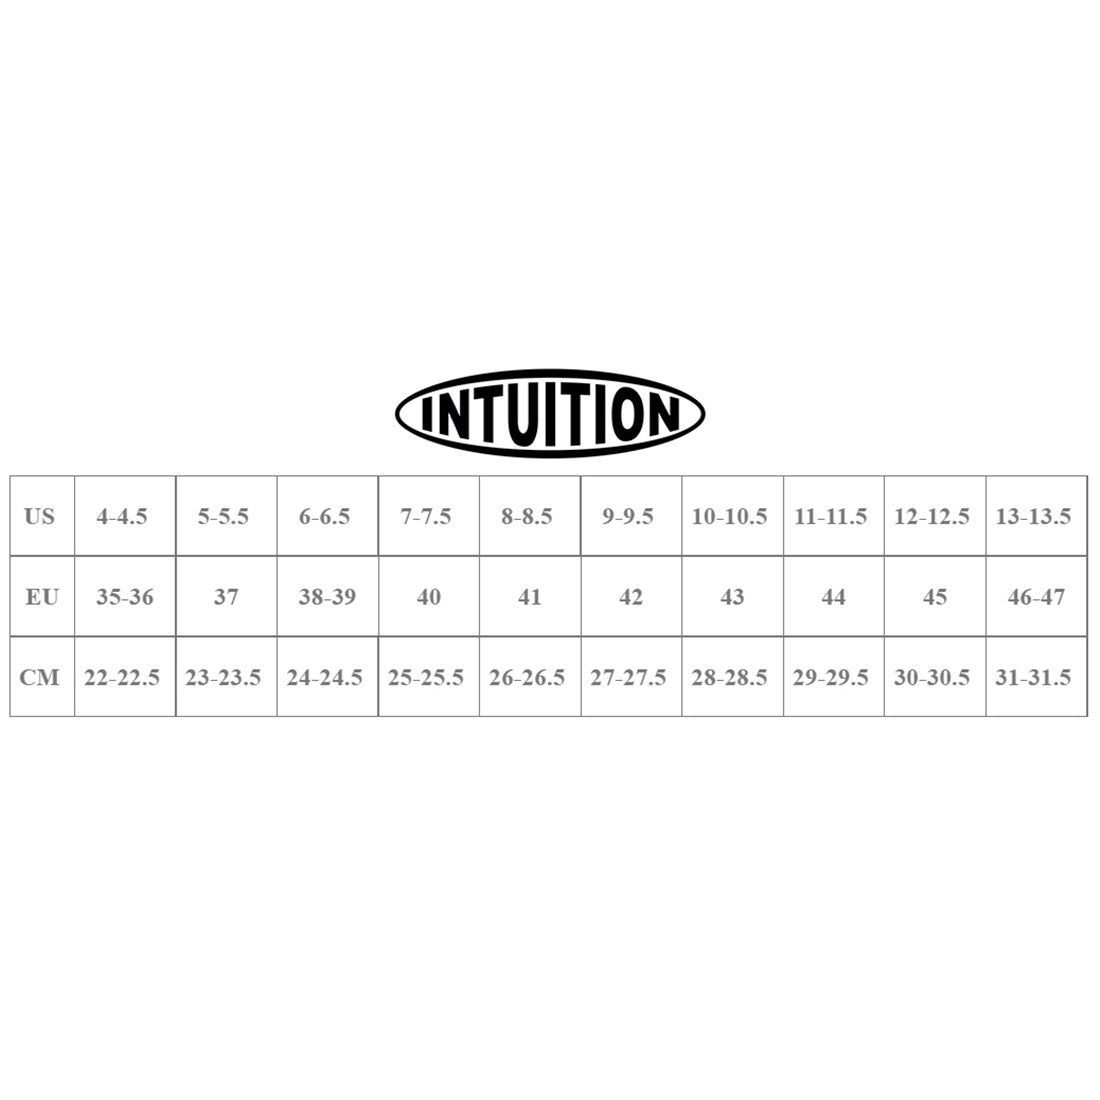 Intuition Premium Skate Liner Inline Hardware and Parts